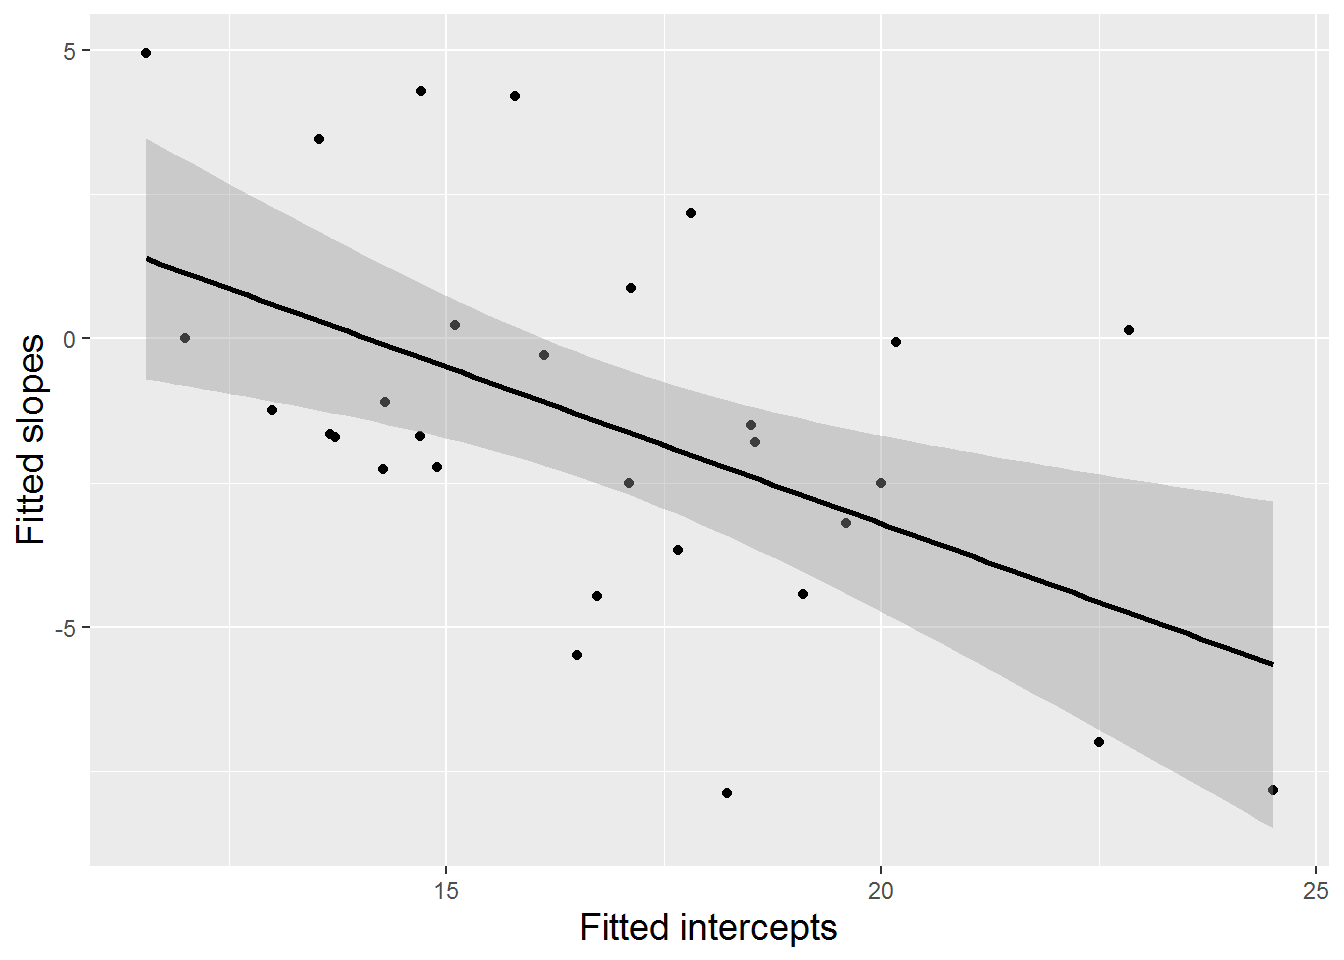 Scatterplot with fitted regression line for estimated intercepts and slopes (one point per subject).